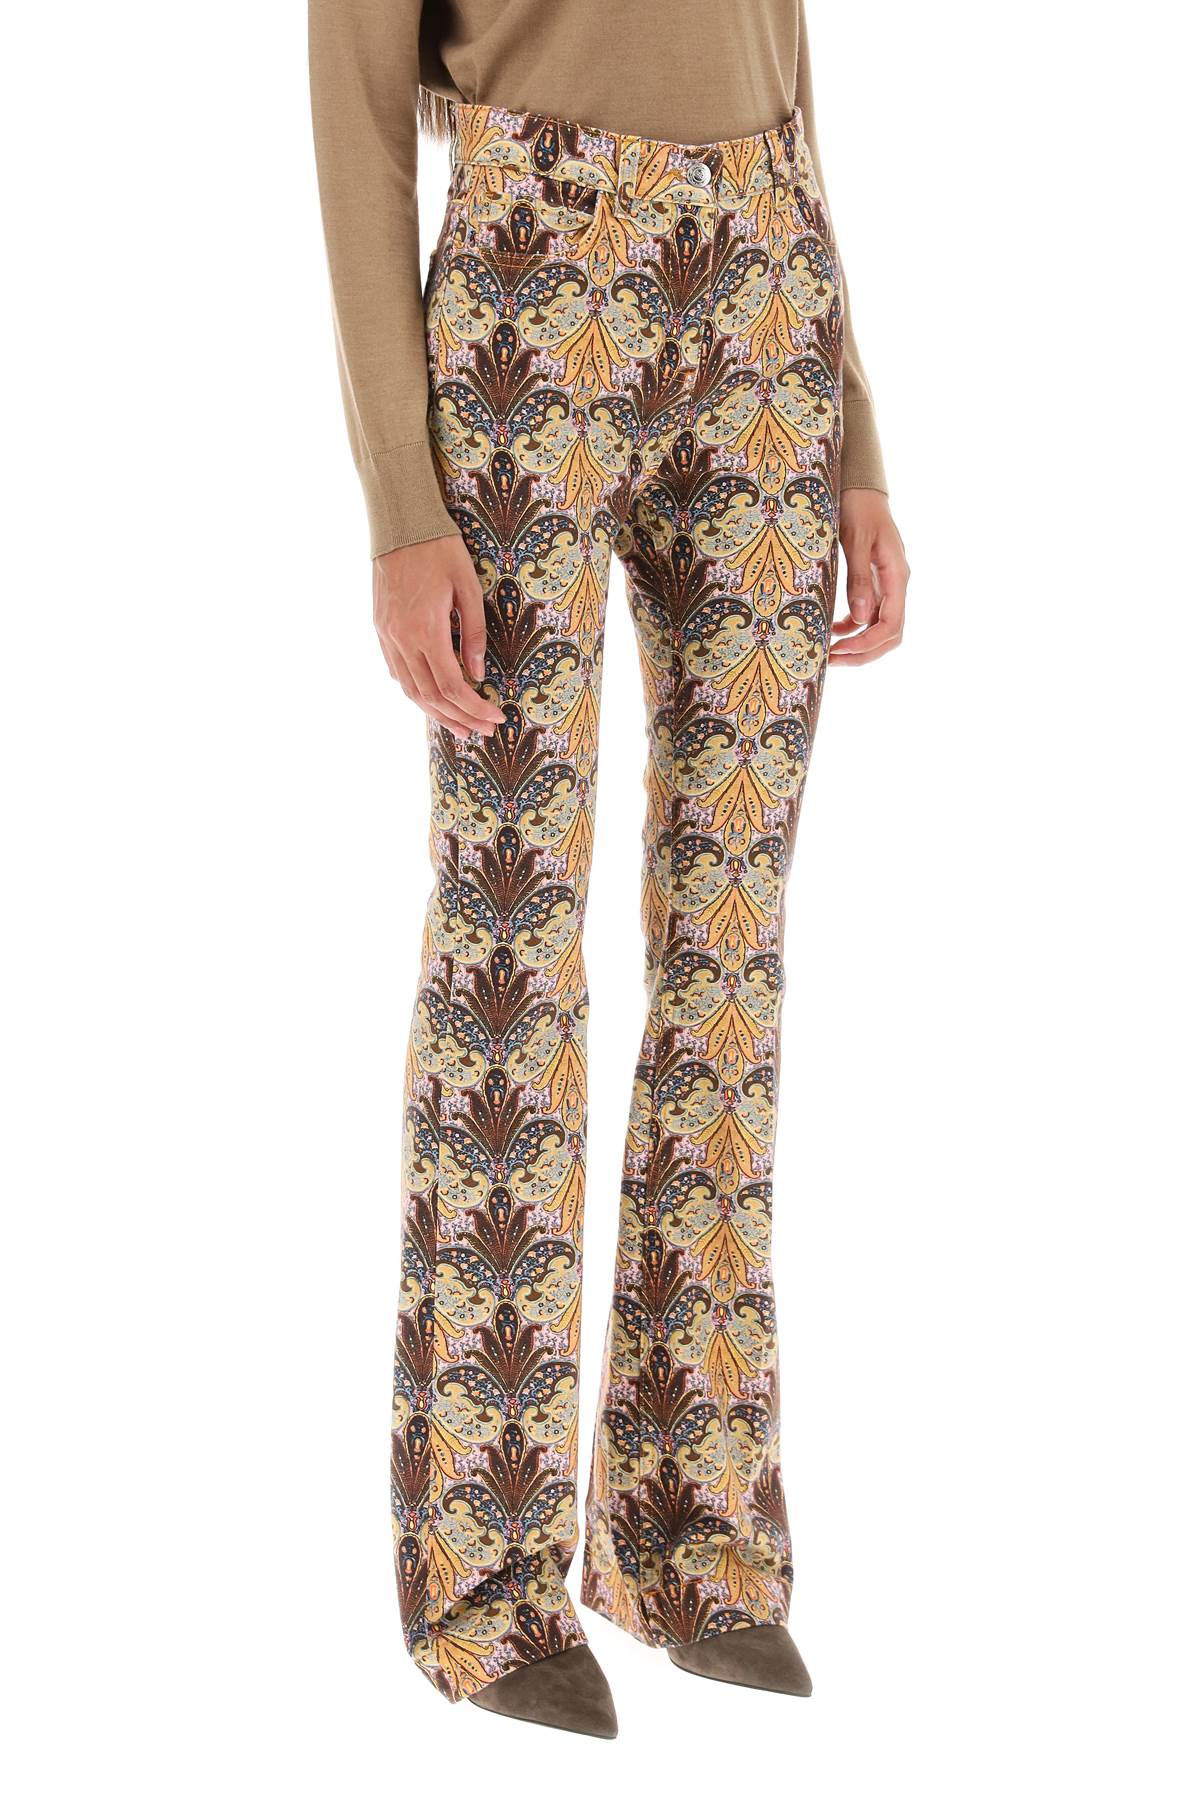 Etro bootcut jeans with paisley pattern